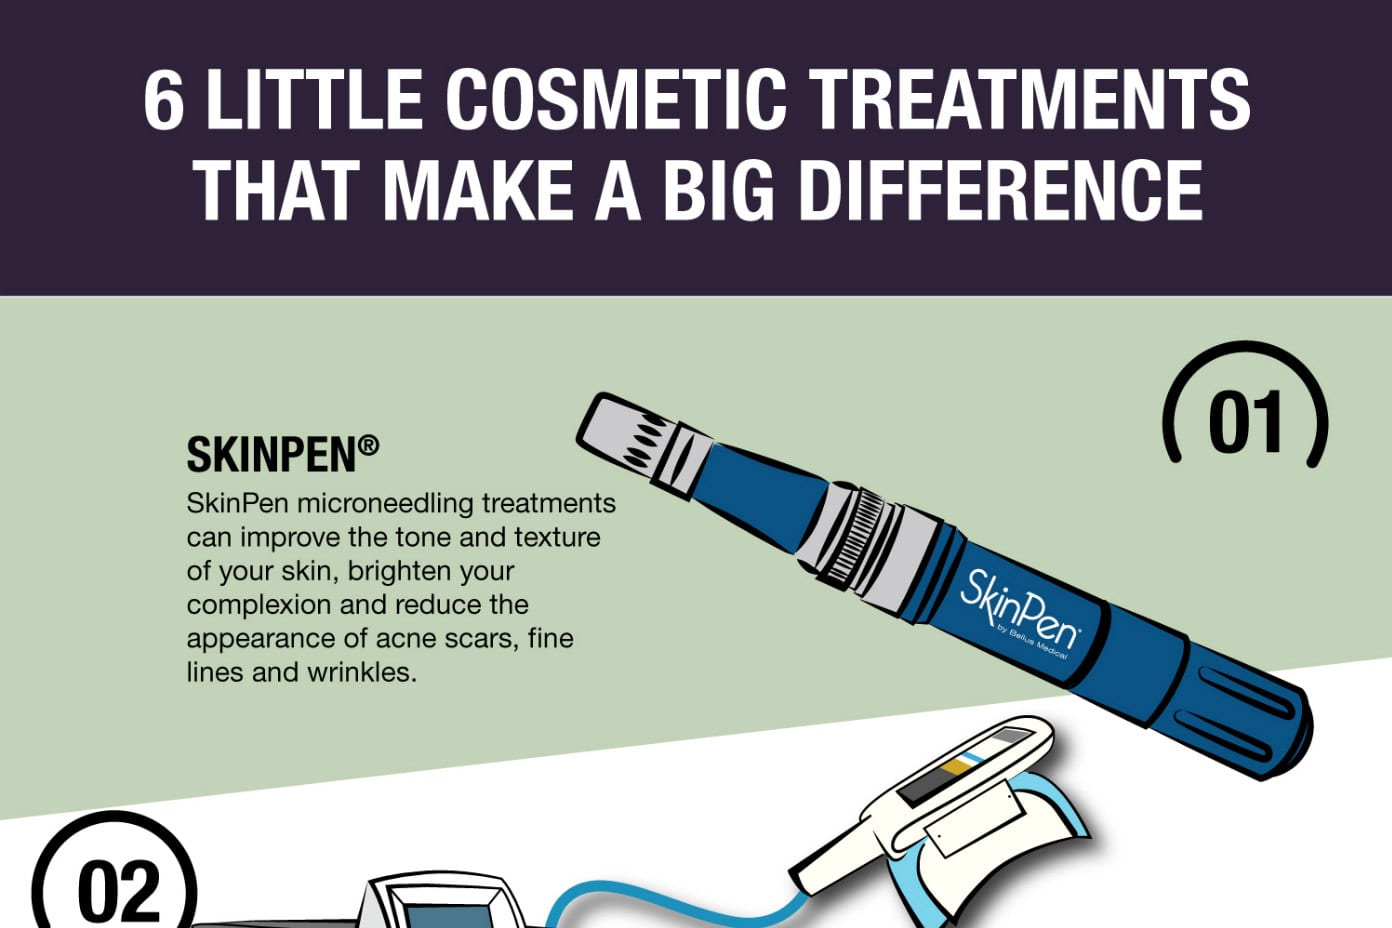 6 Little Cosmetic Treatments That Make a Big Difference [Infographic]